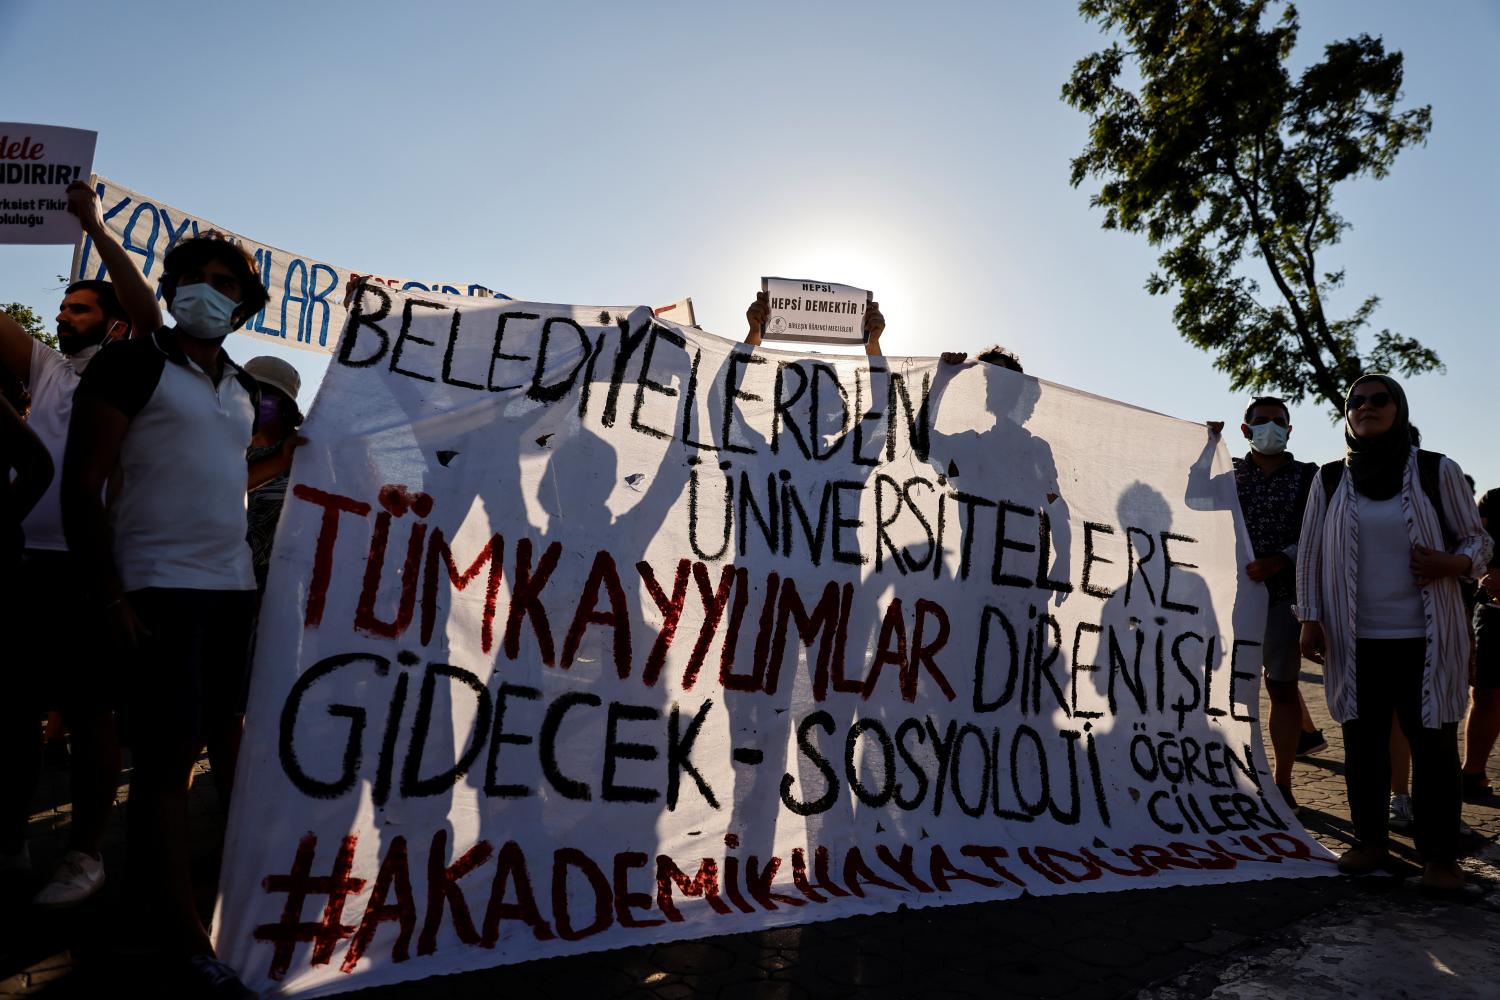 Students gather to protest against what they say is government interference in academia despite President Tayyip Erdogan's ousting of Melih Bulu, a rector whose appointment in January triggered months of demonstrations, in Istanbul, Turkey, July 16, 2021. The banner reads "All the government-appointed trustees at municipalities and universities will go". REUTERS/Umit Bektas